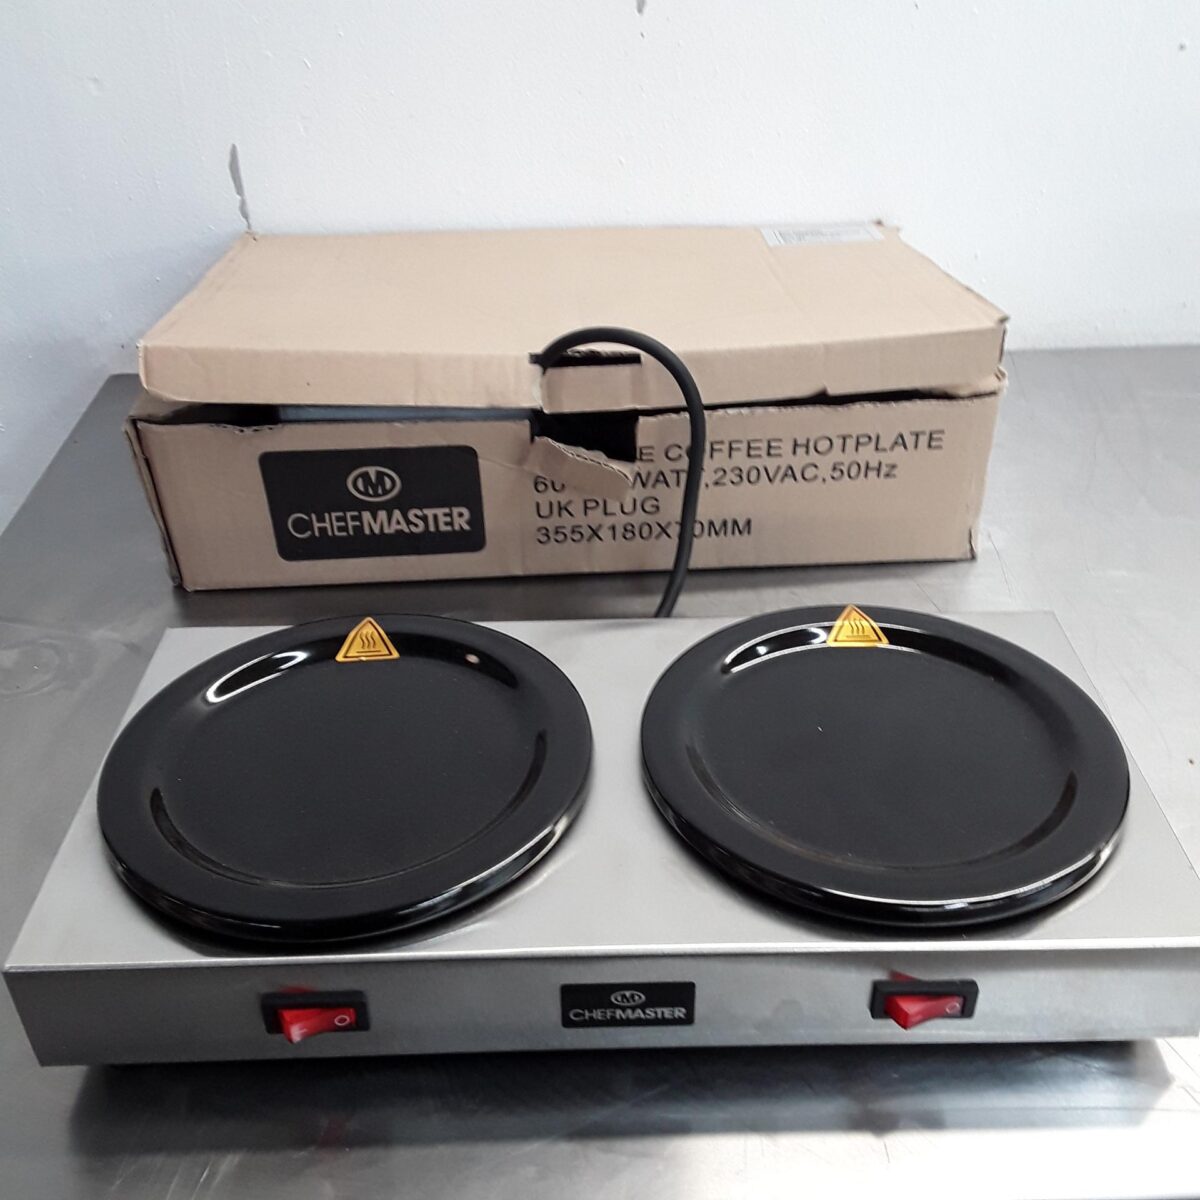 New B Grade Chefmaster HEB087 Double Coffee Hot plate For Sale